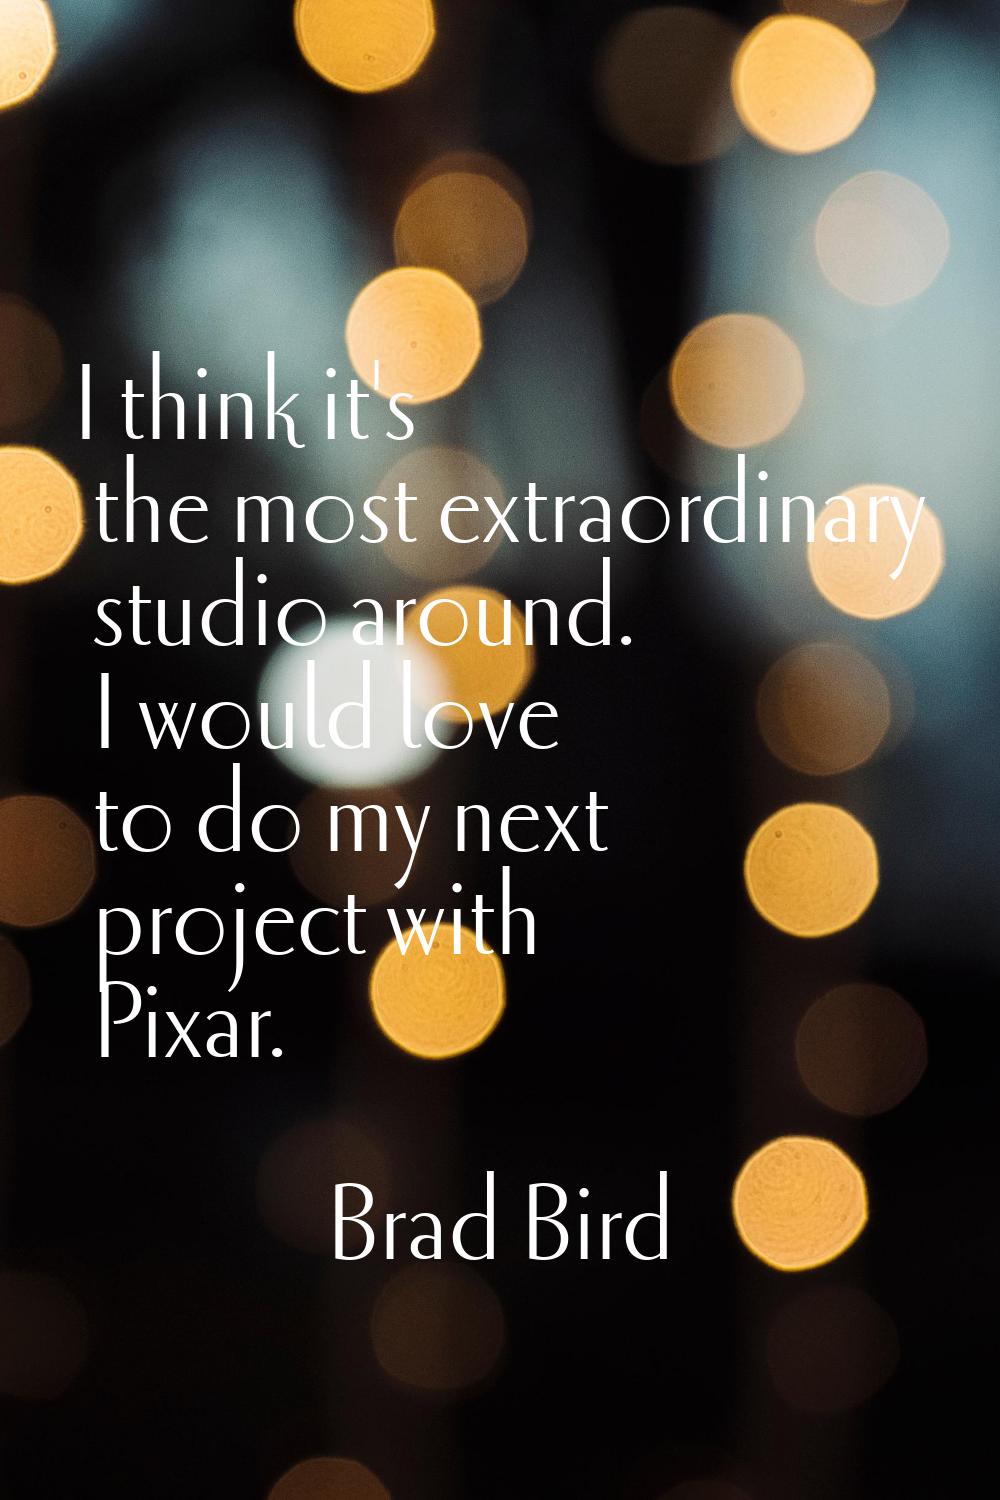 I think it's the most extraordinary studio around. I would love to do my next project with Pixar.